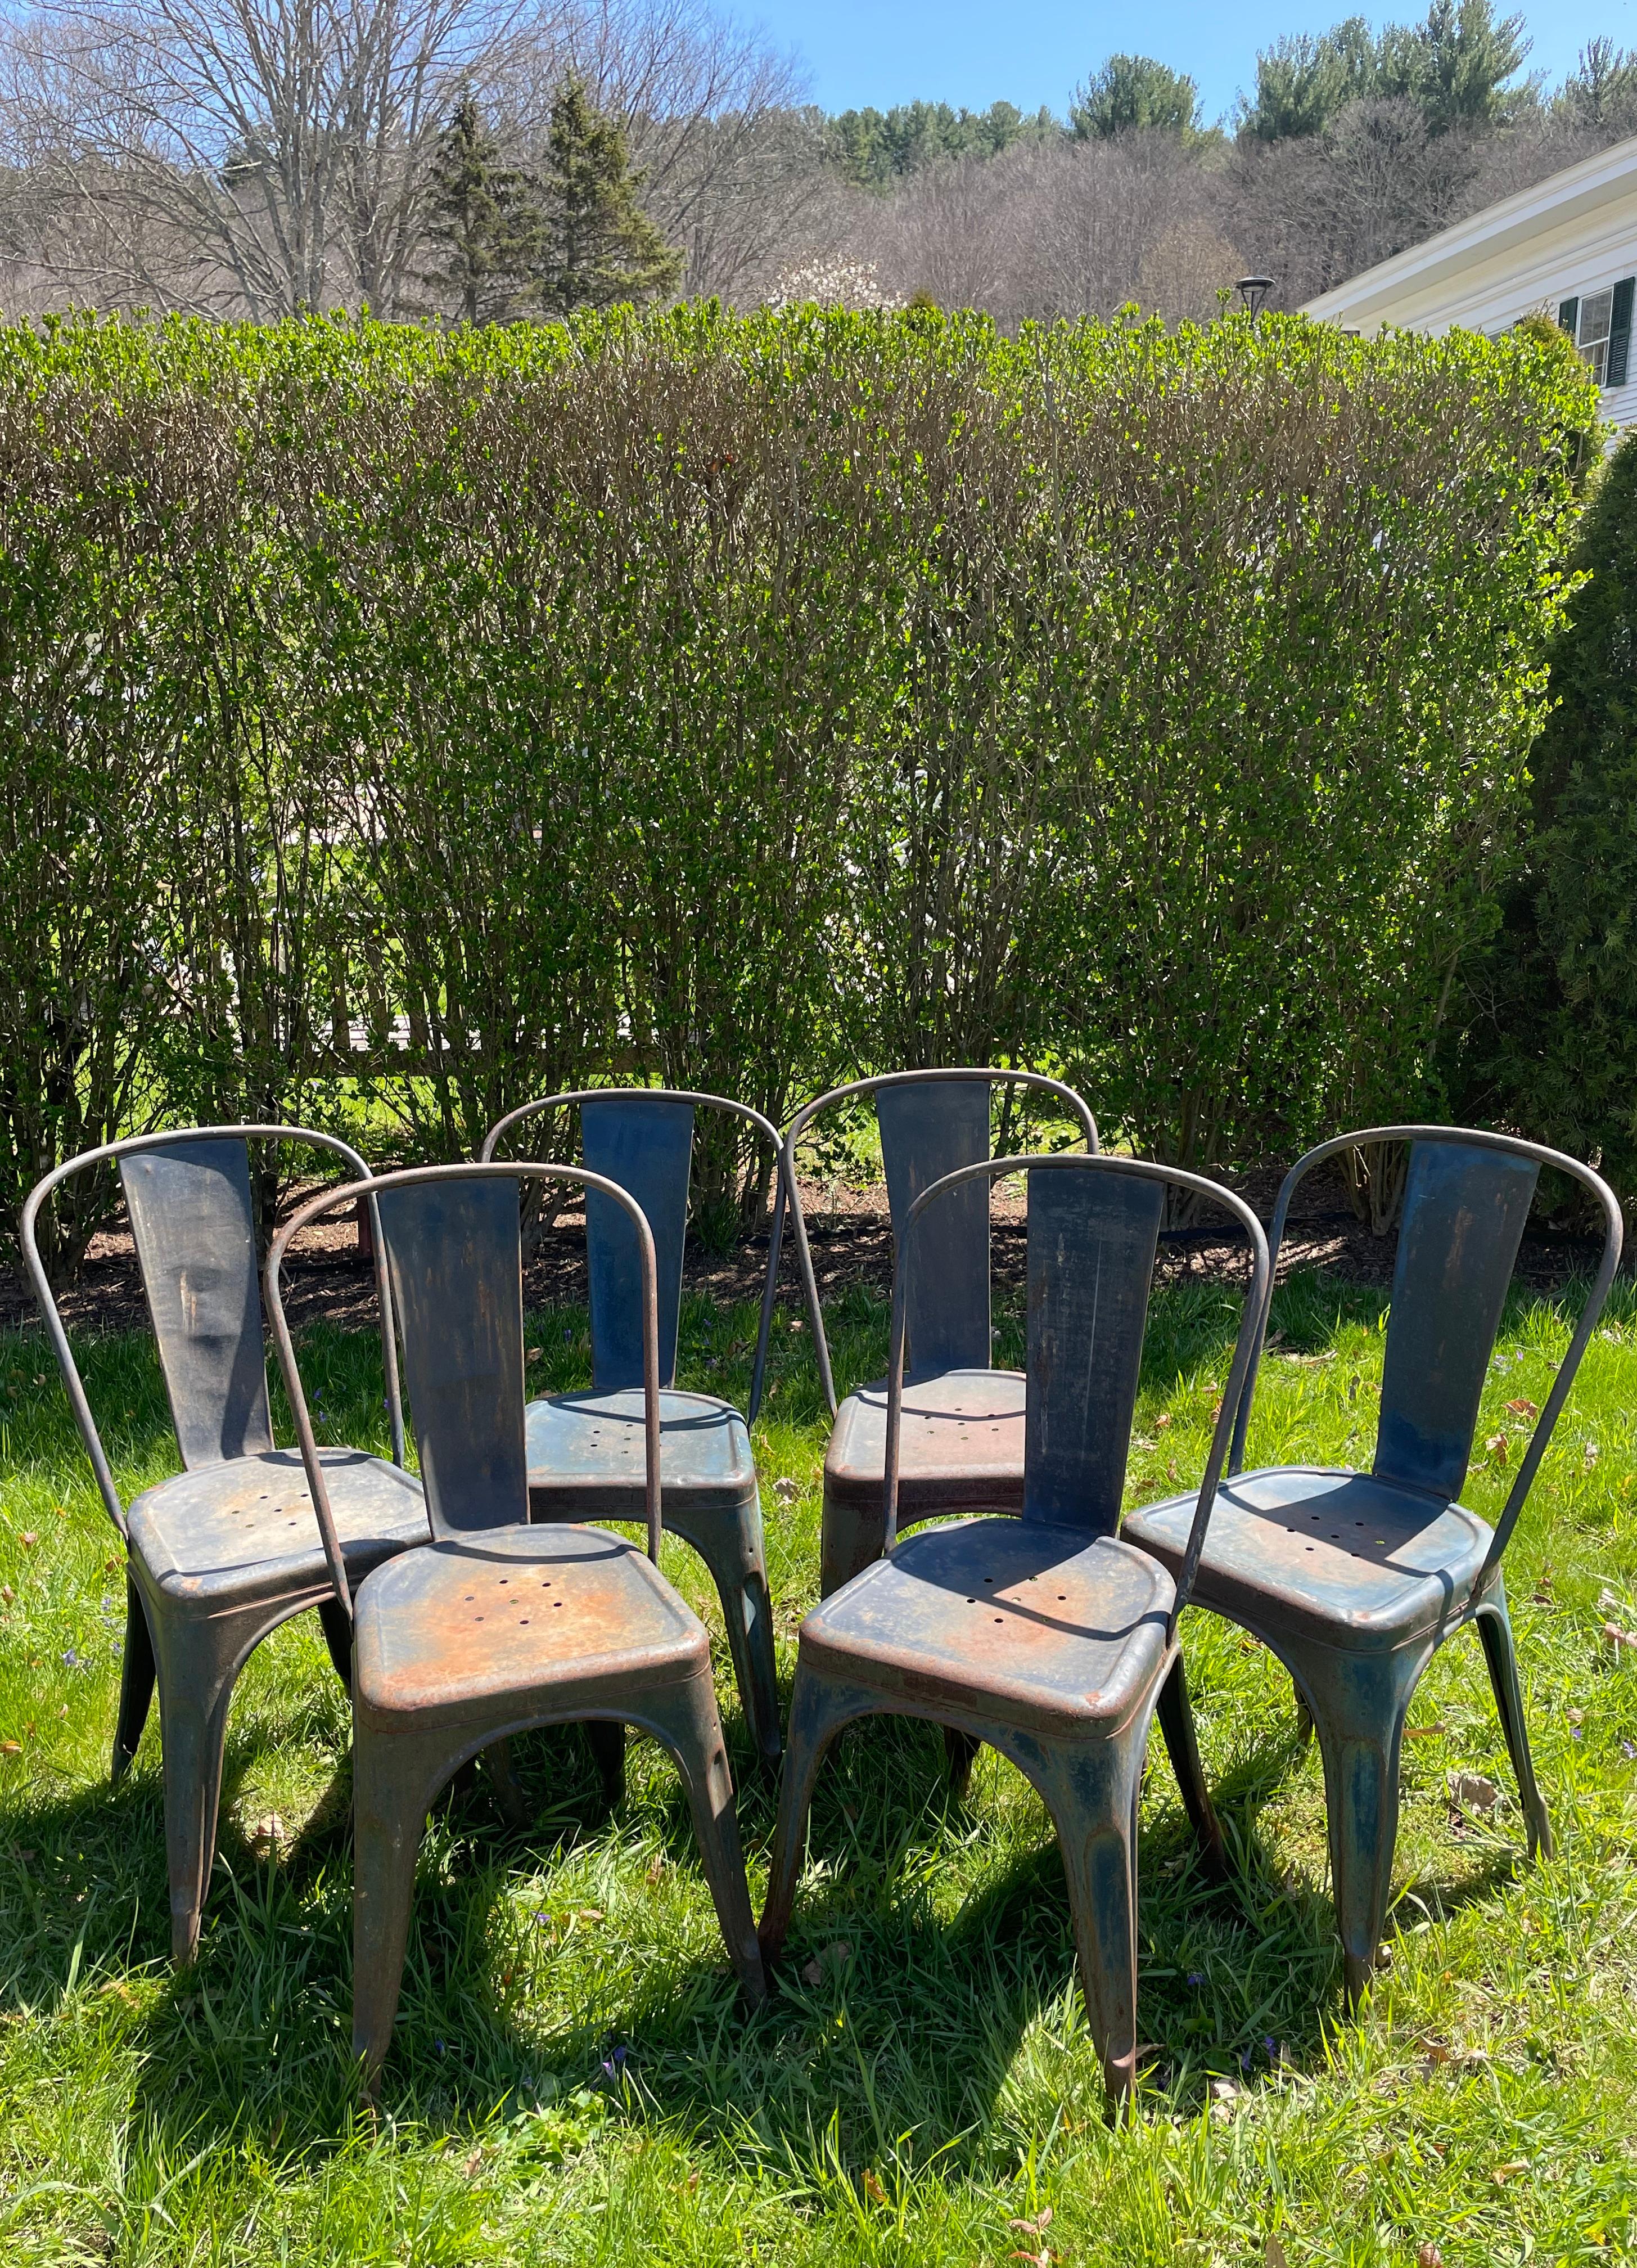 This wonderful set of six Tolix Model A metal dining chairs is in excellent condition and features its original lovely dark blue paint with a bit of surface rusting. Originally designed in 1934 by the founder of Tolix, Xavier Pauchard, this chair